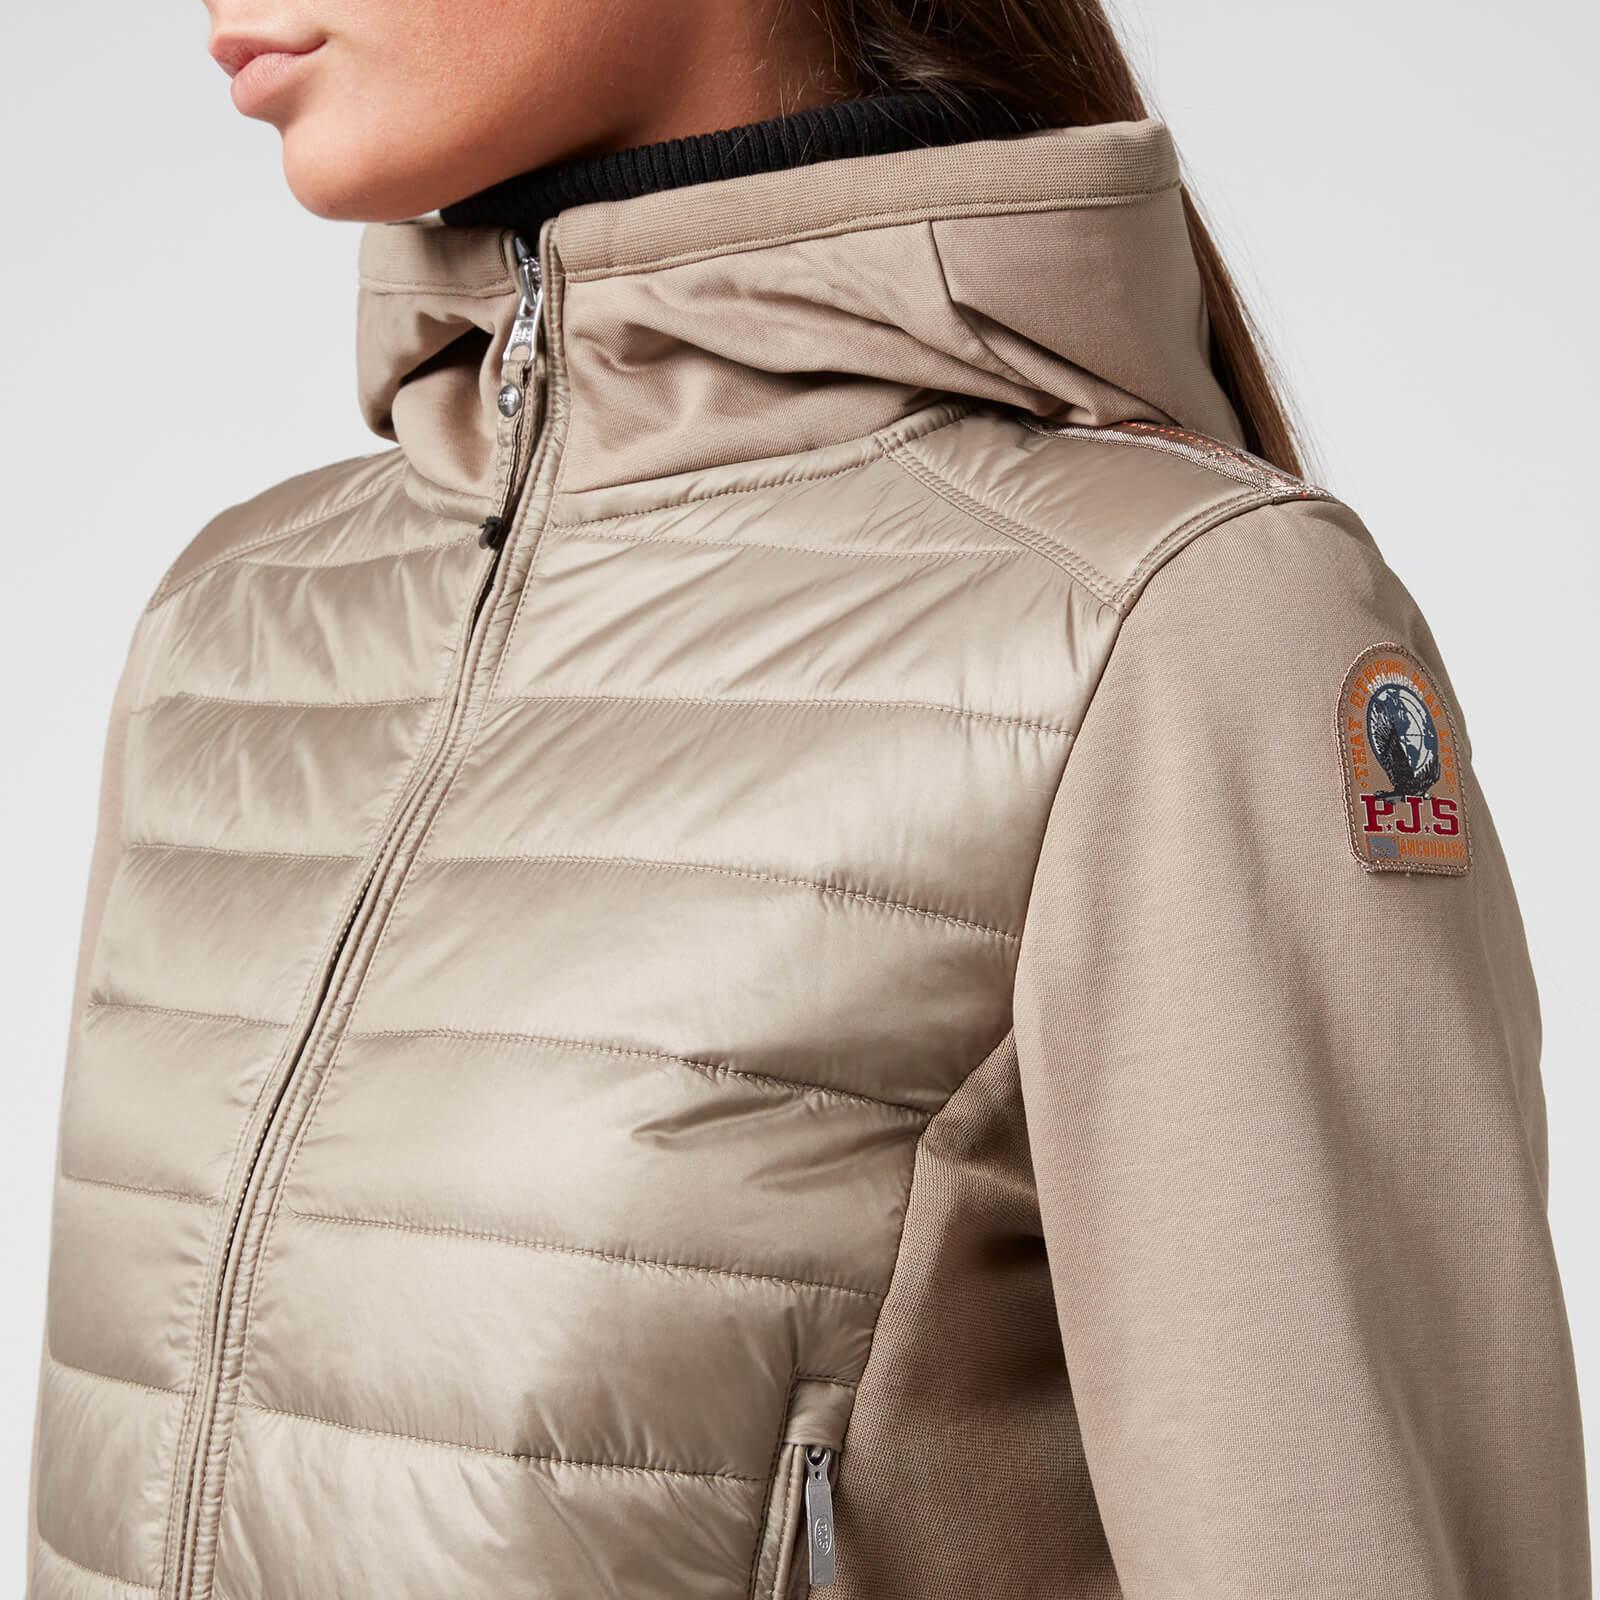 Parajumpers Caelie Jacket in Natural | Lyst UK